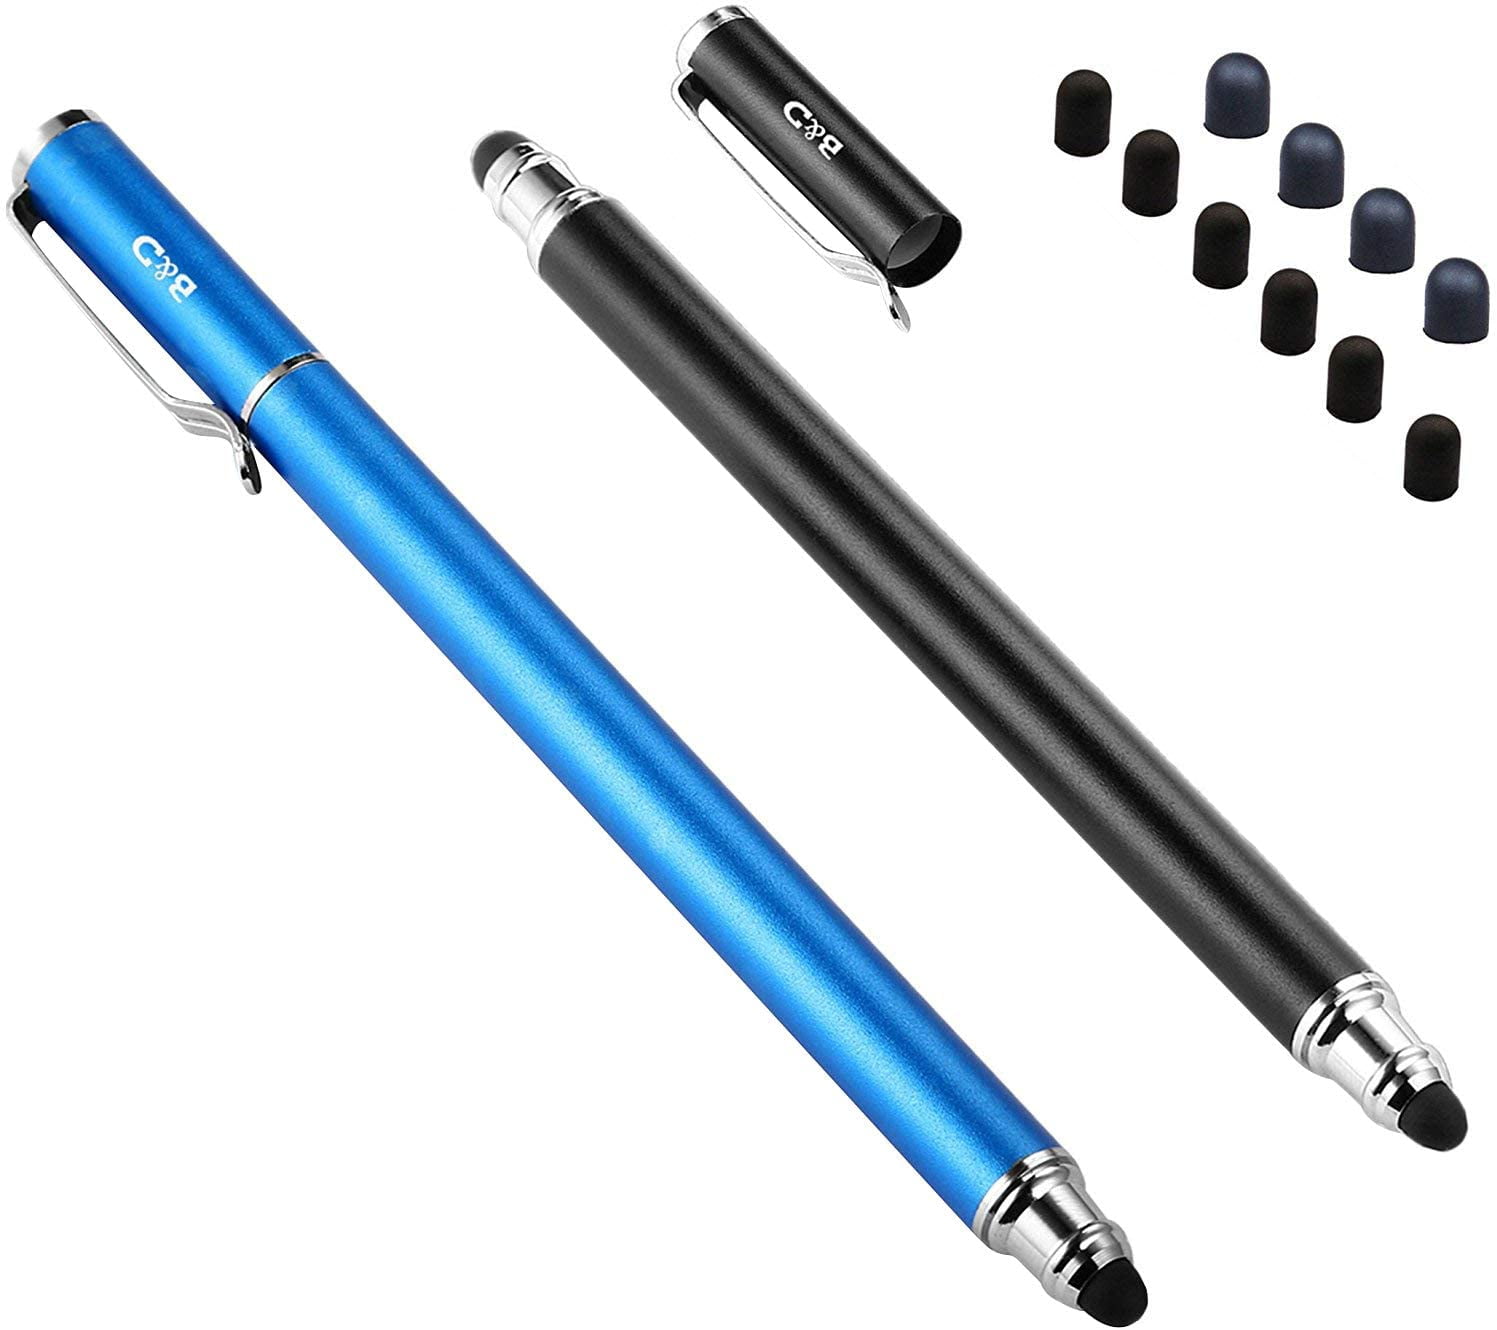 2 Pcs 0.18-inch Rubber Tip Series 5.5L Stylus Pens for Touch Screen Devices with 6 Extra Replaceable Soft Rubber Tips -Black/Blue Bragains Depot